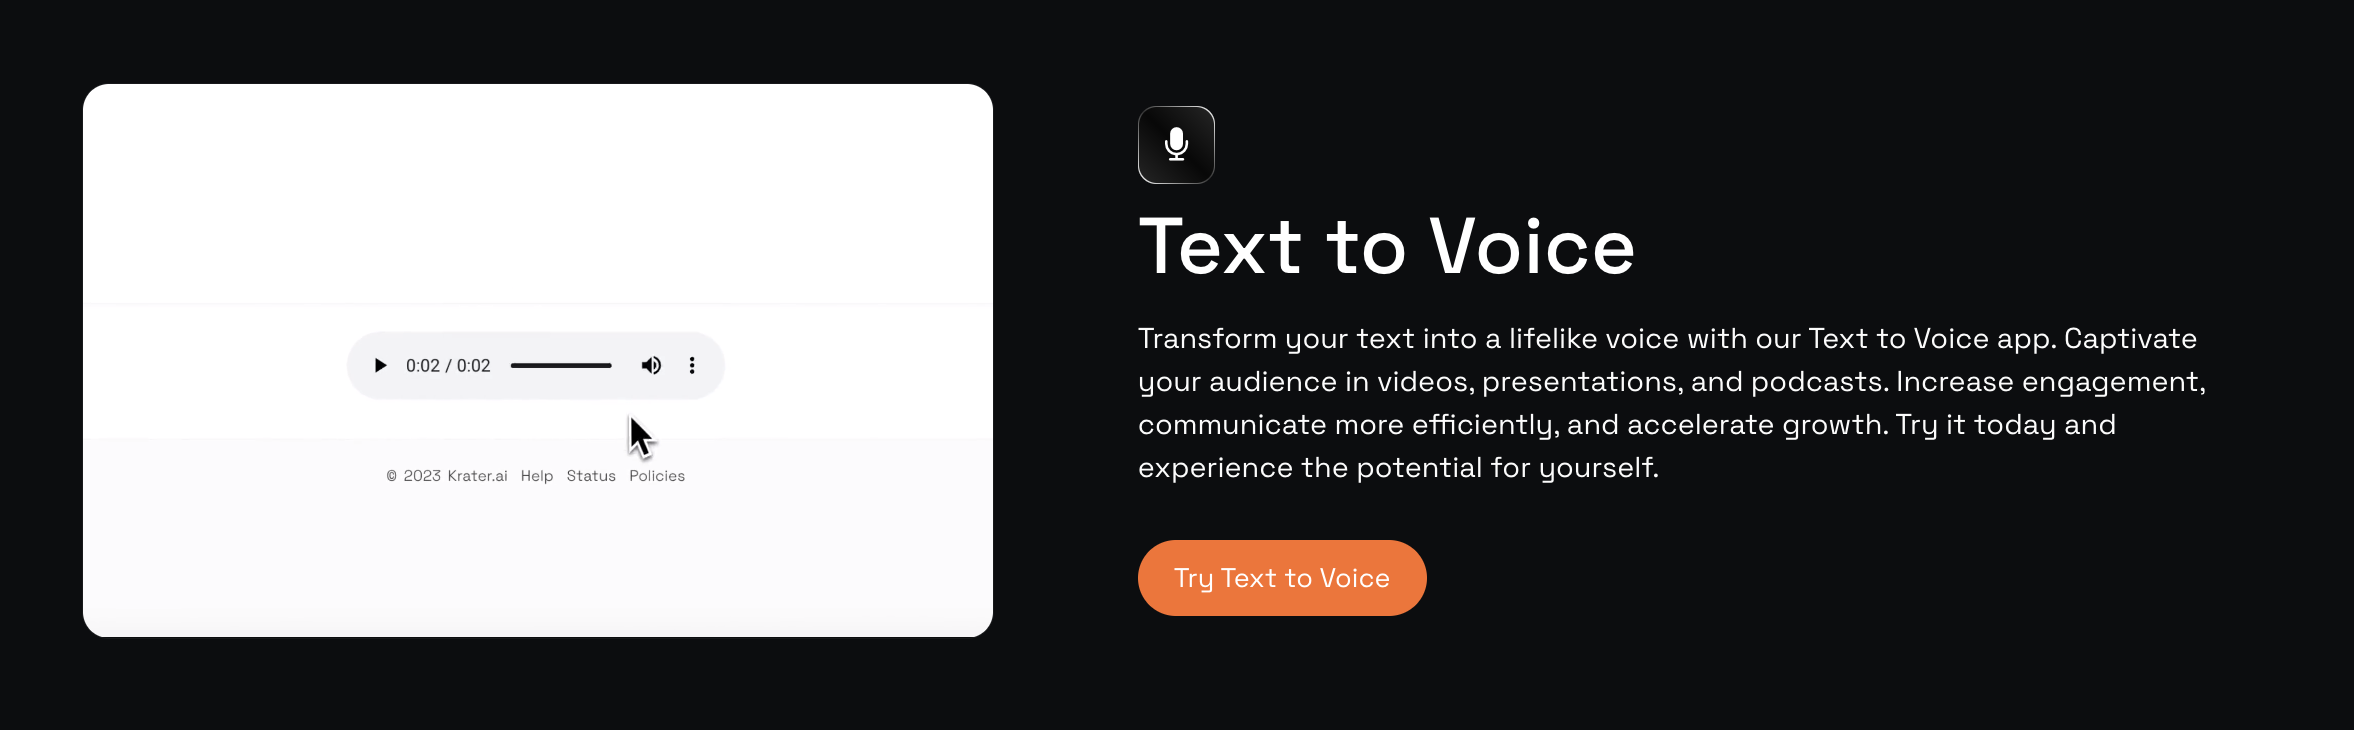 Text to Voice Features